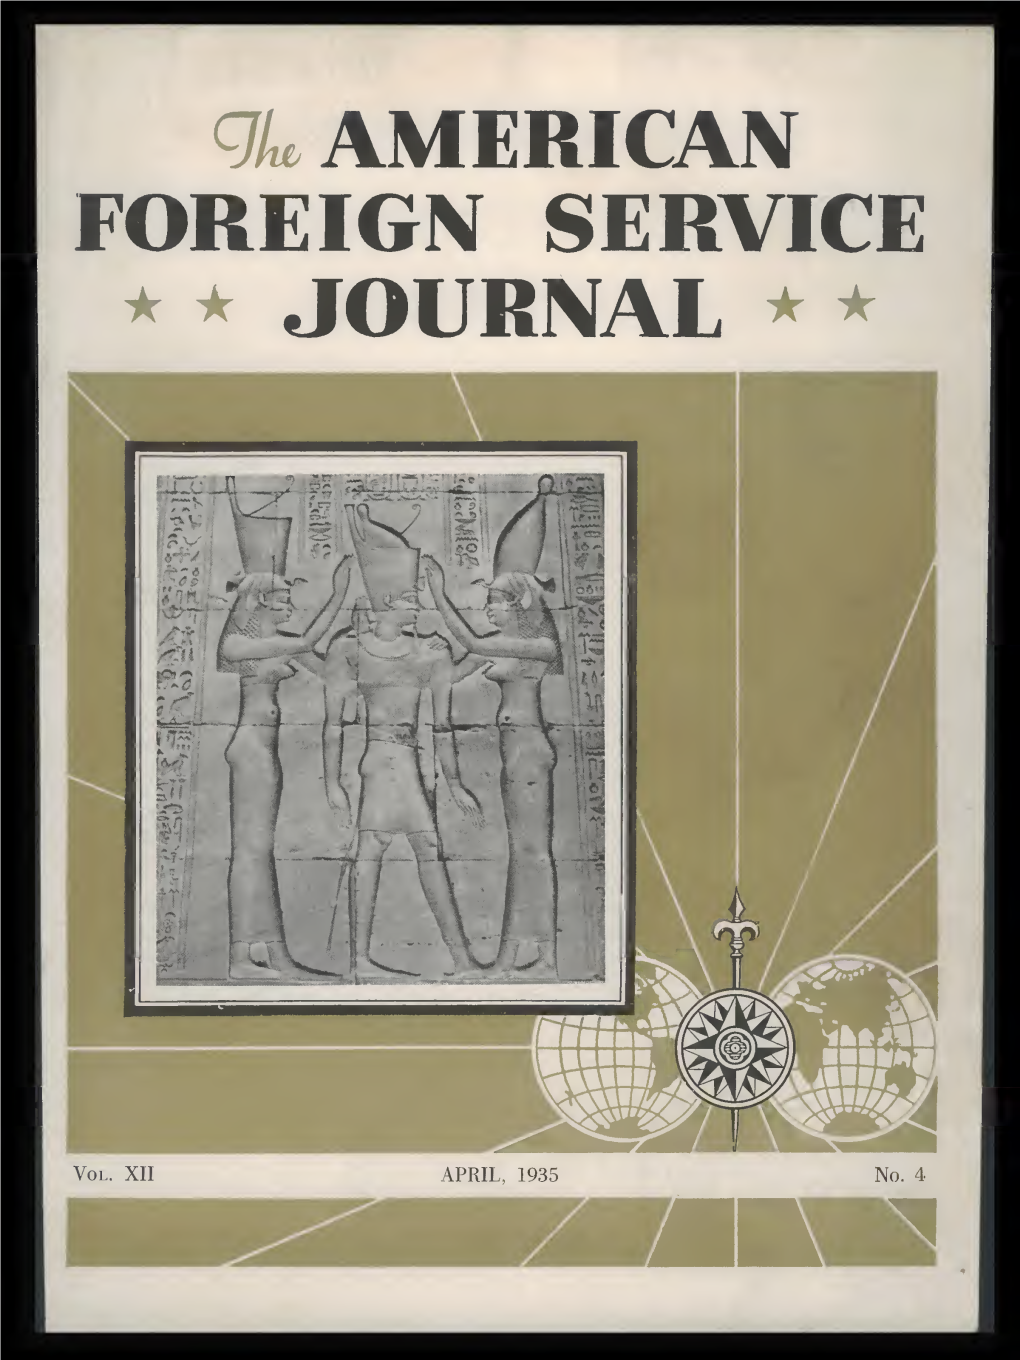 The Foreign Service Journal, April 1935